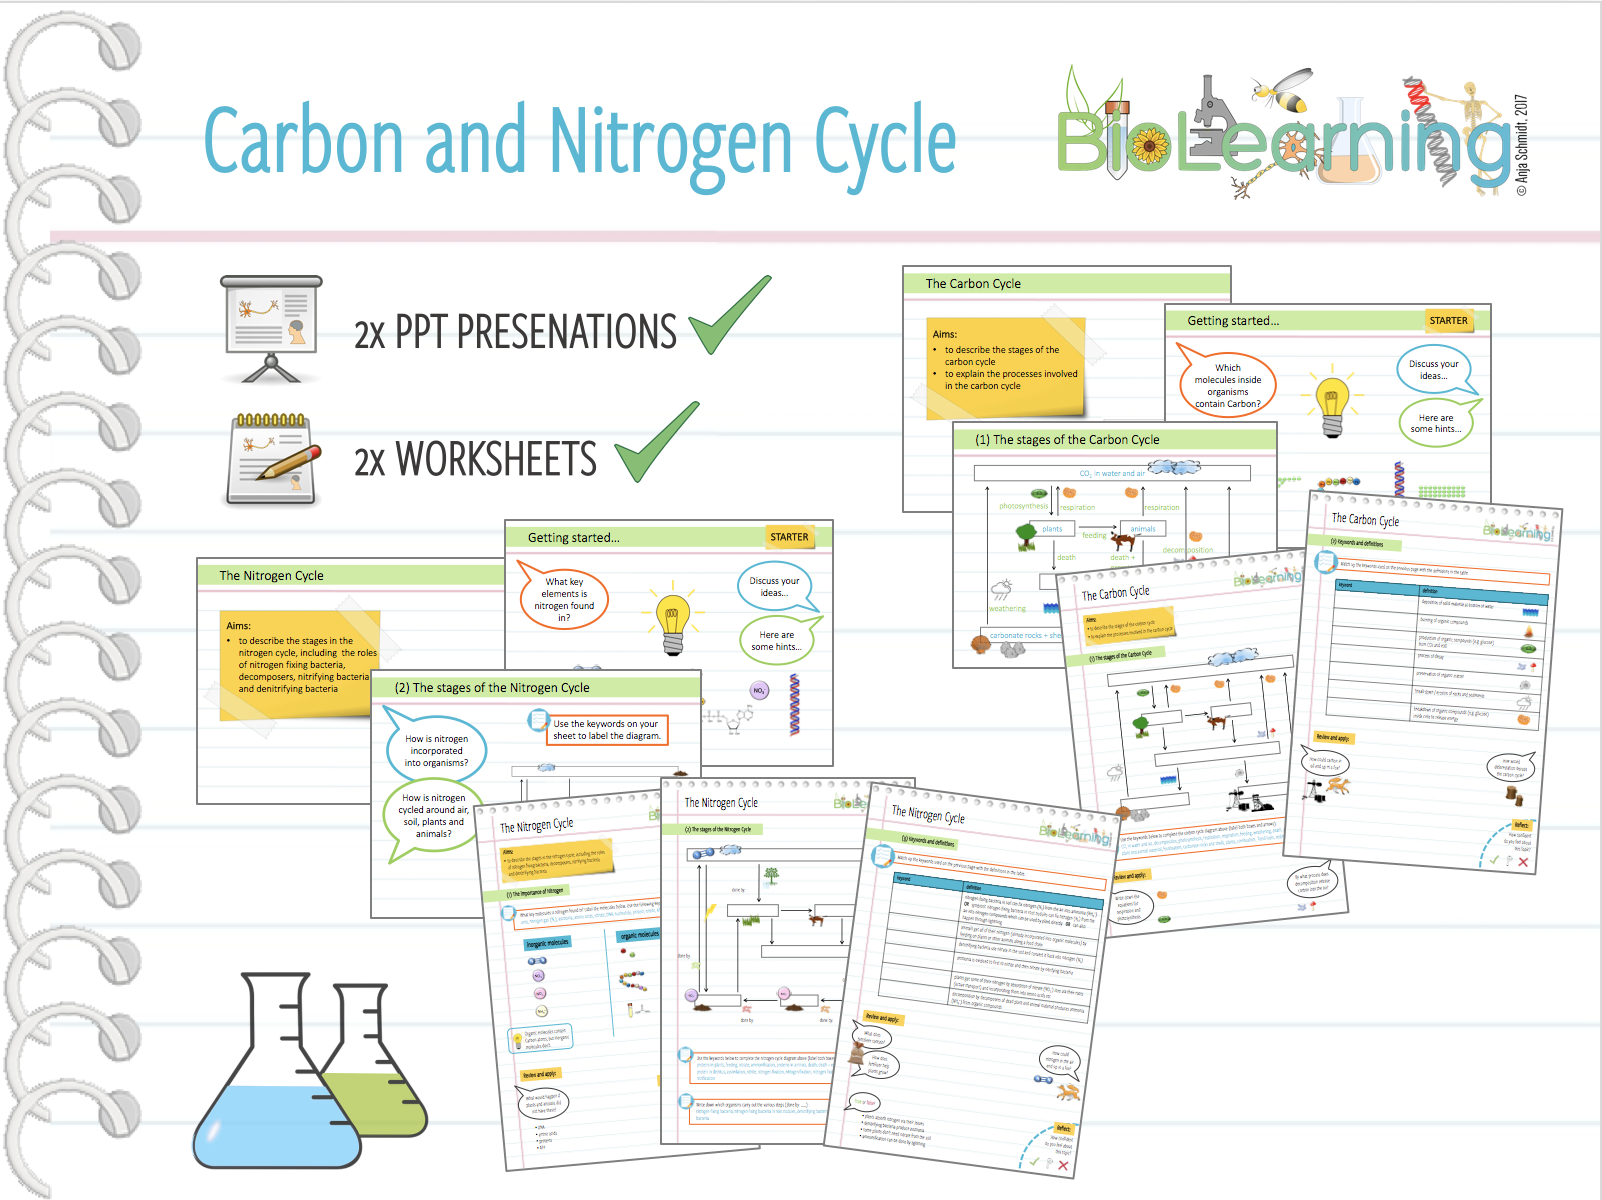 water-carbon-and-nitrogen-cycle-worksheet-db-excel